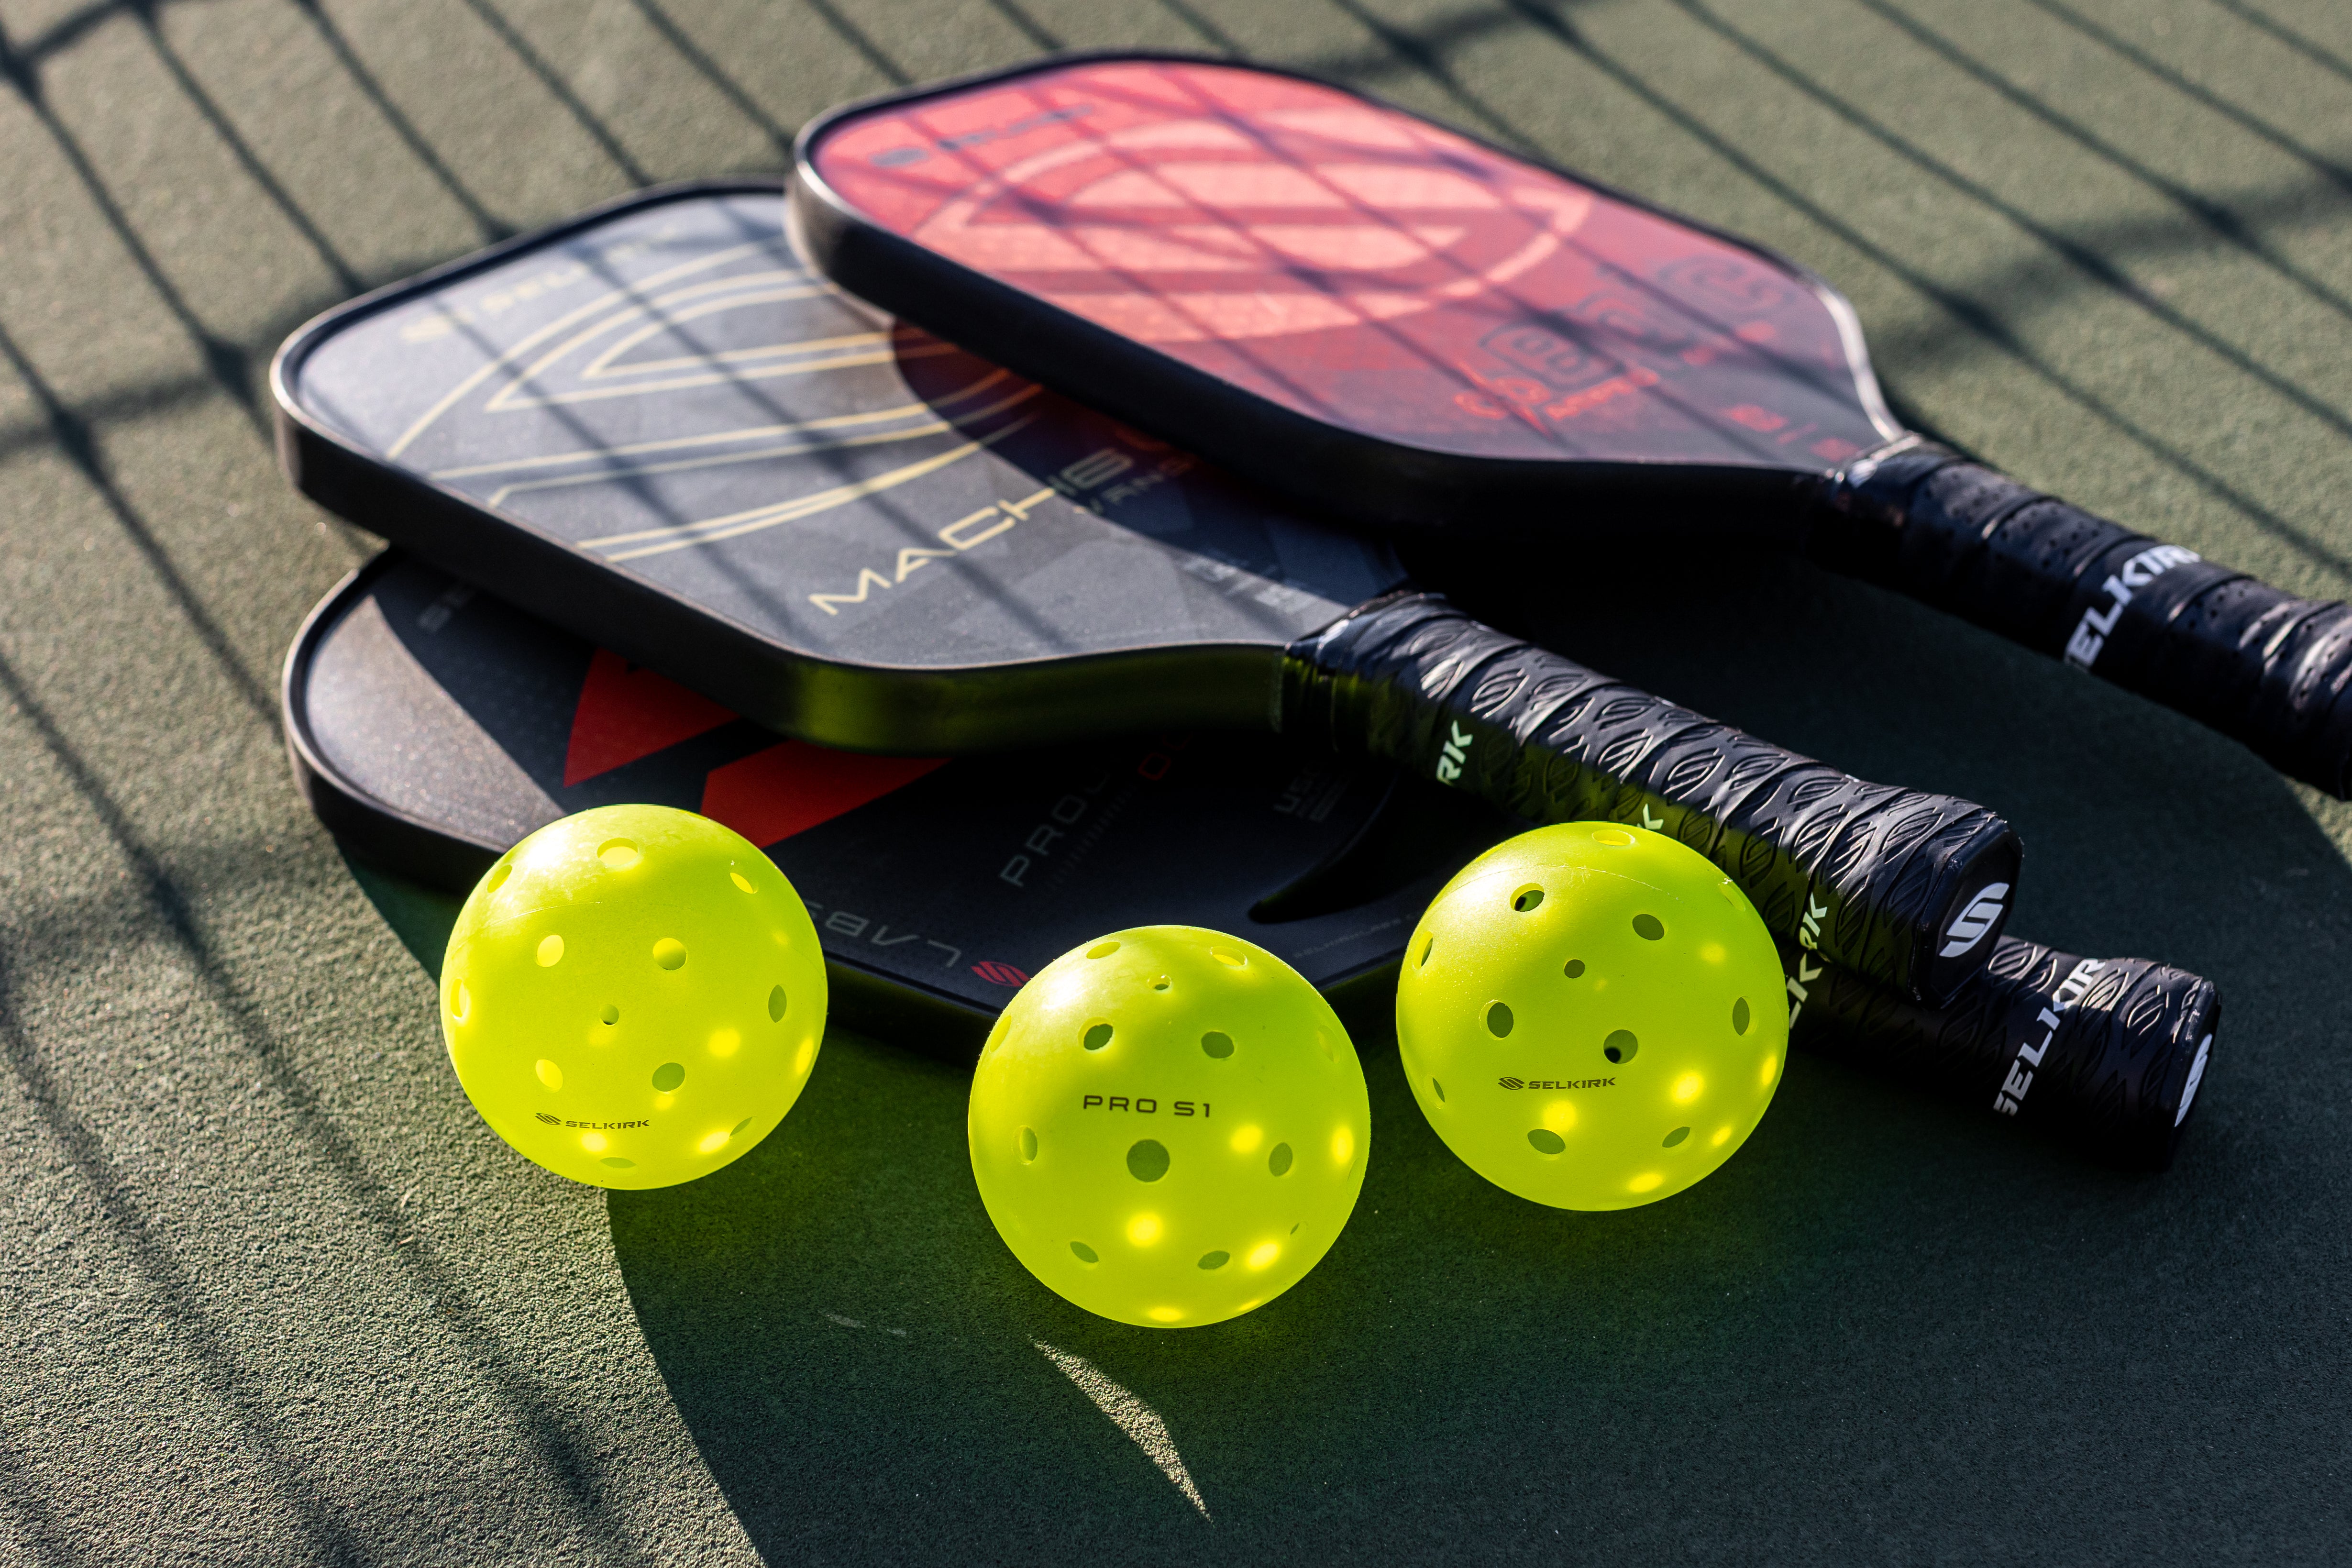 Different pickleball paddles can be used for singles and doubles matches.